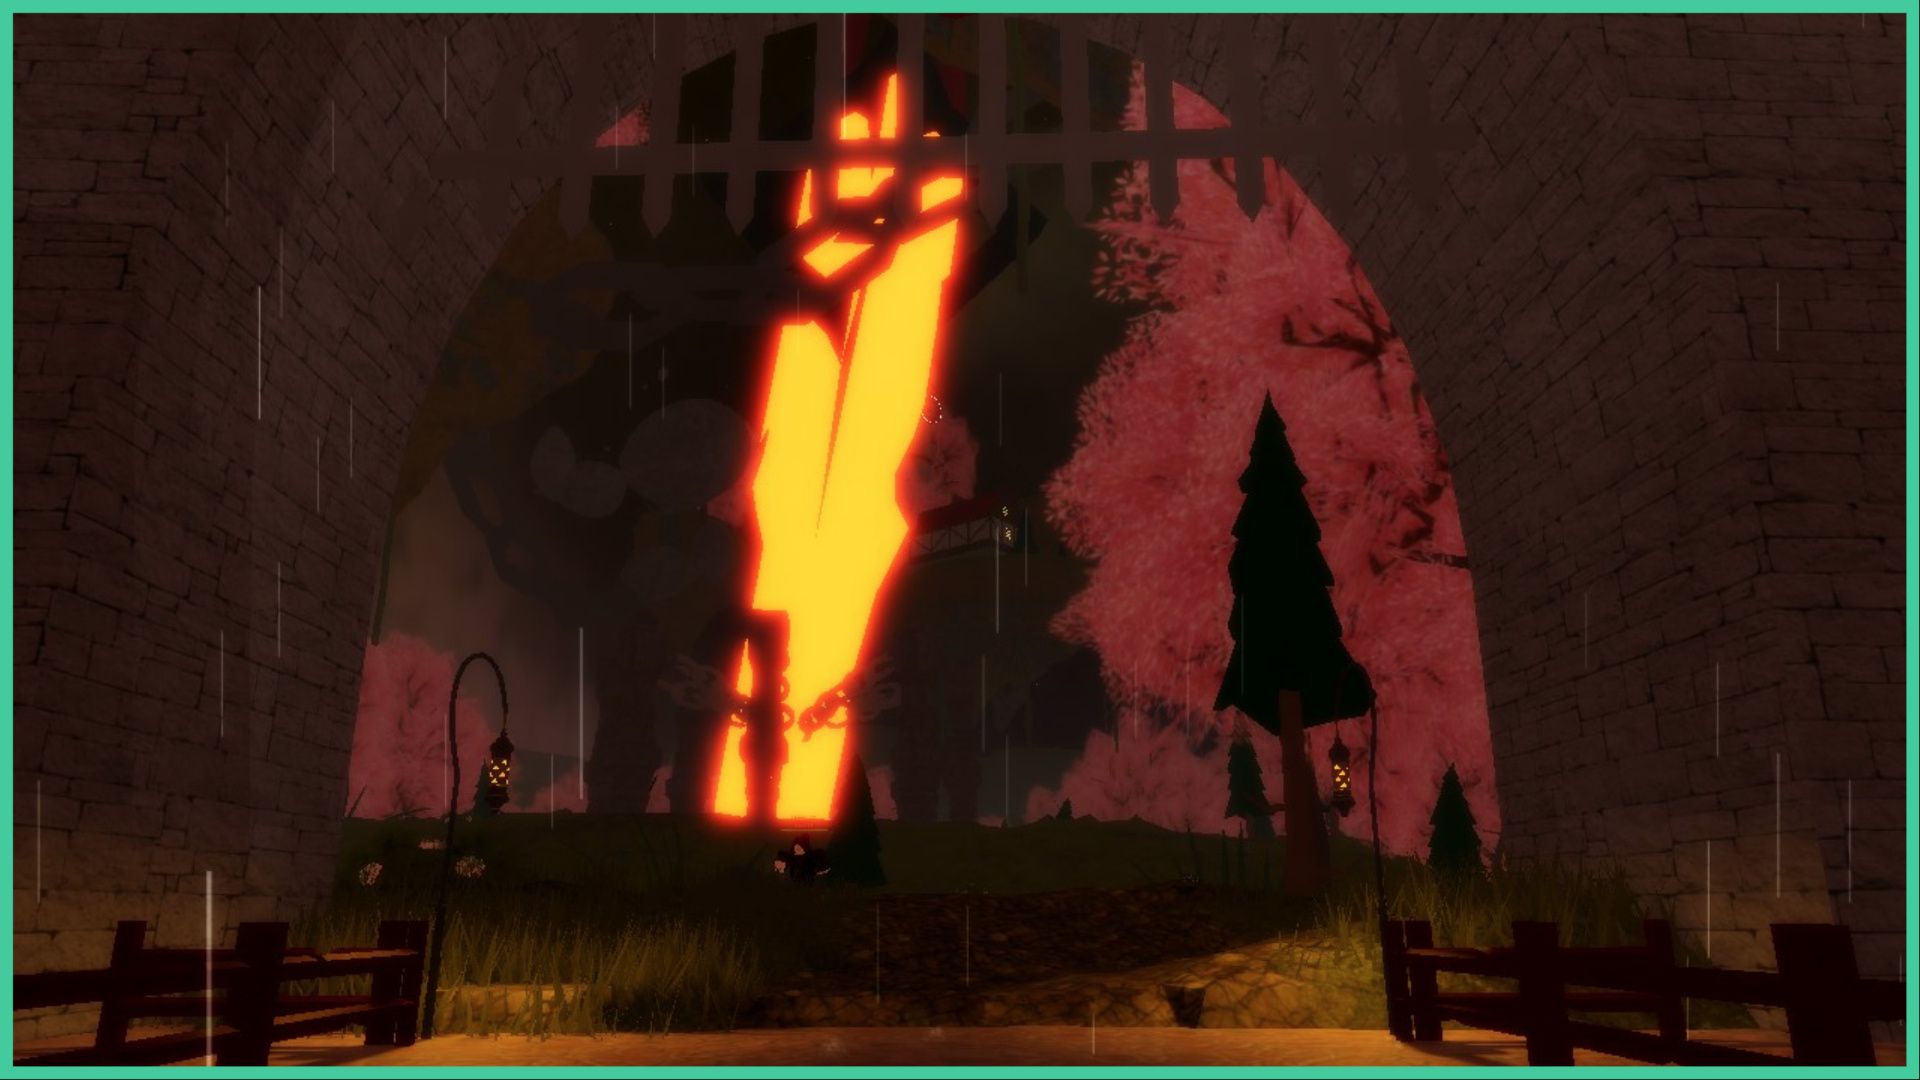 feature image for our legends rewritten best blessing guide, the image features a screenshot of the rainy forest at the start of the game, as a giant flame rod stands in the ground, as trees and grass surround it, with large sakura trees around the forest, there are bandits wandering around, as the player stands in a stone tunnel, lined with wooden fences, with two streetlamps on either side to light up the path